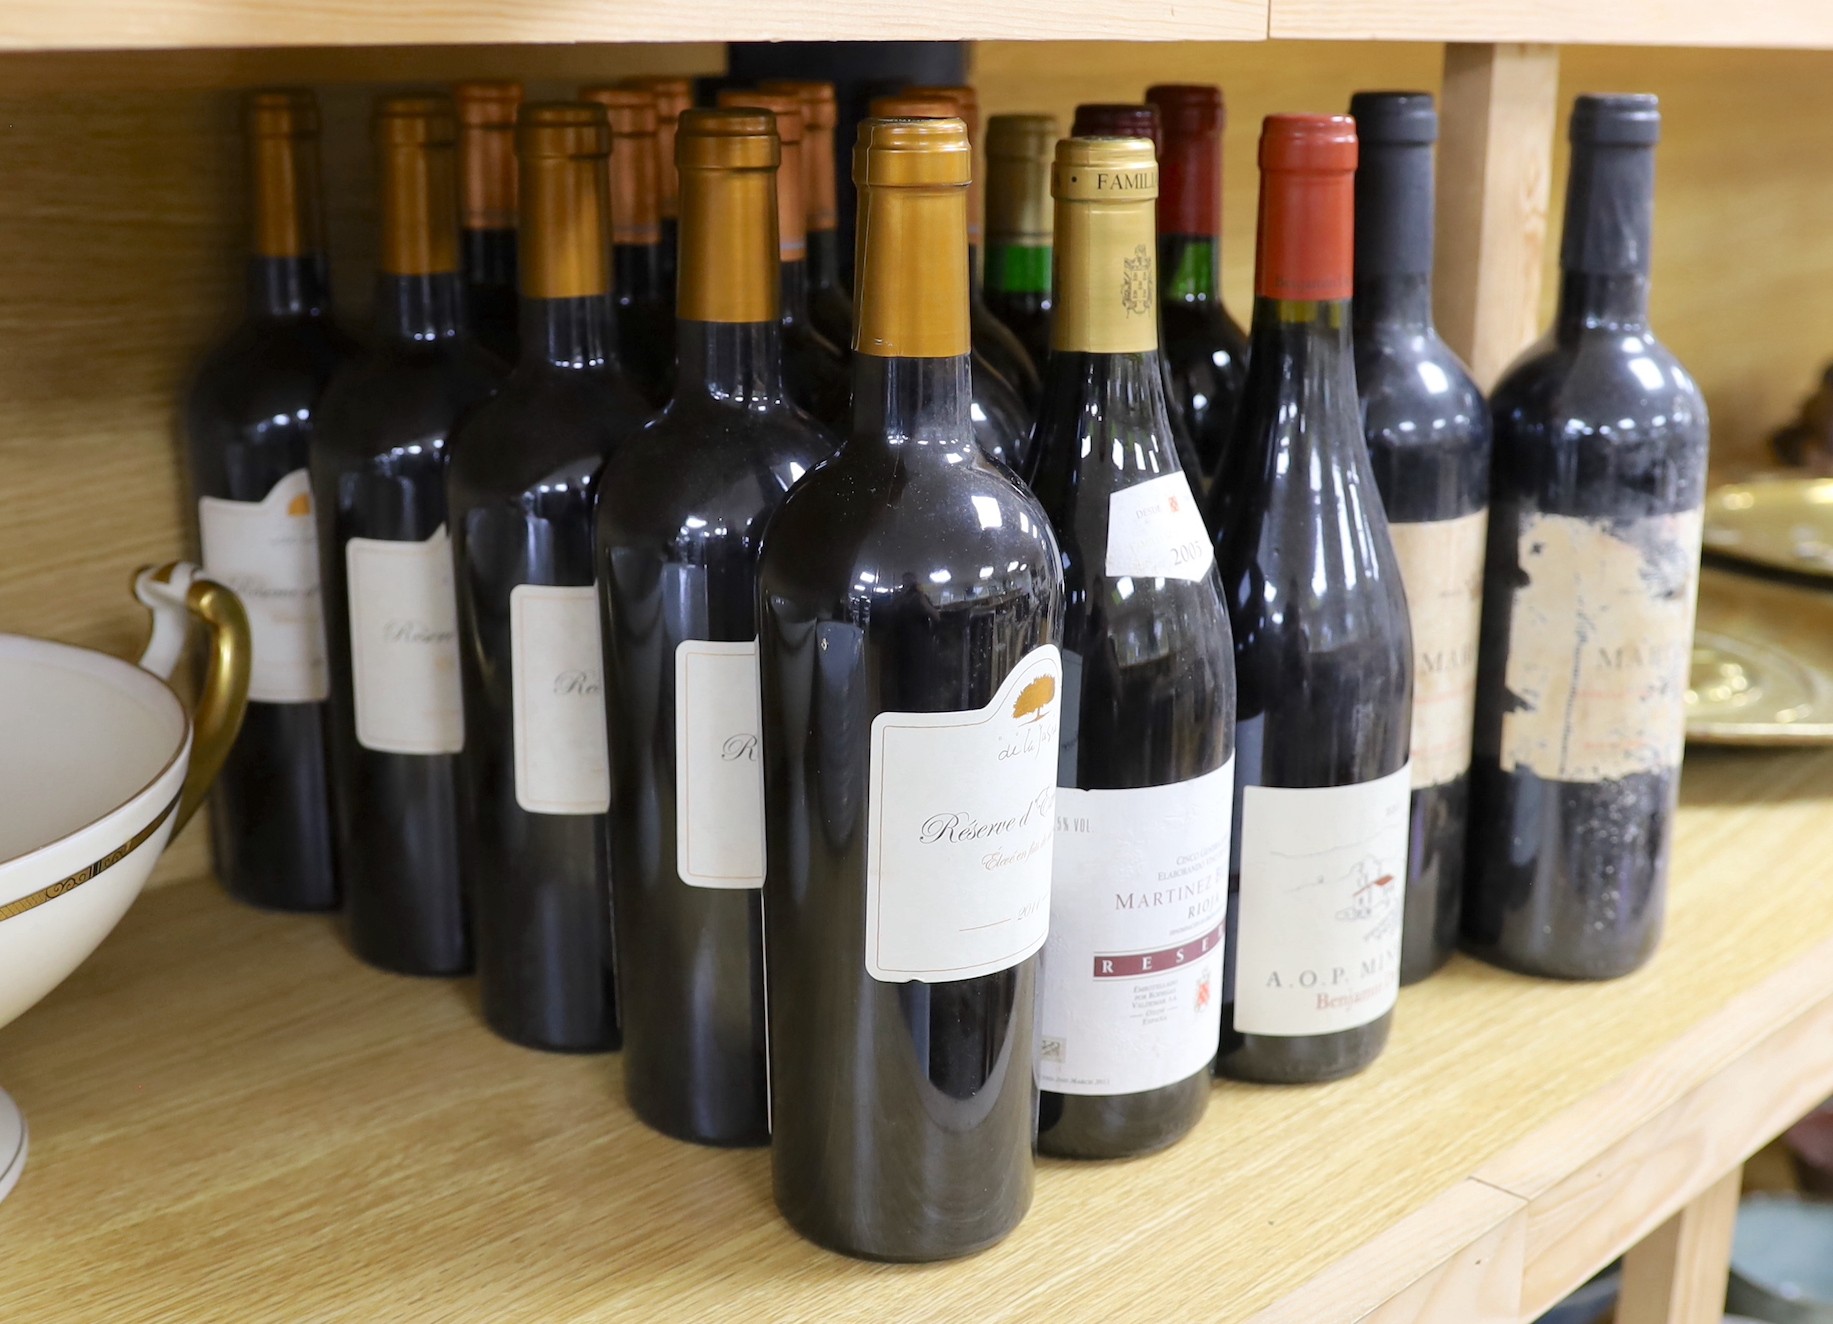 20 various bottles of red wine including 5 bottles of Reserve d’Excellence 2011, 7 bottles of Pauillac 2006, etc.